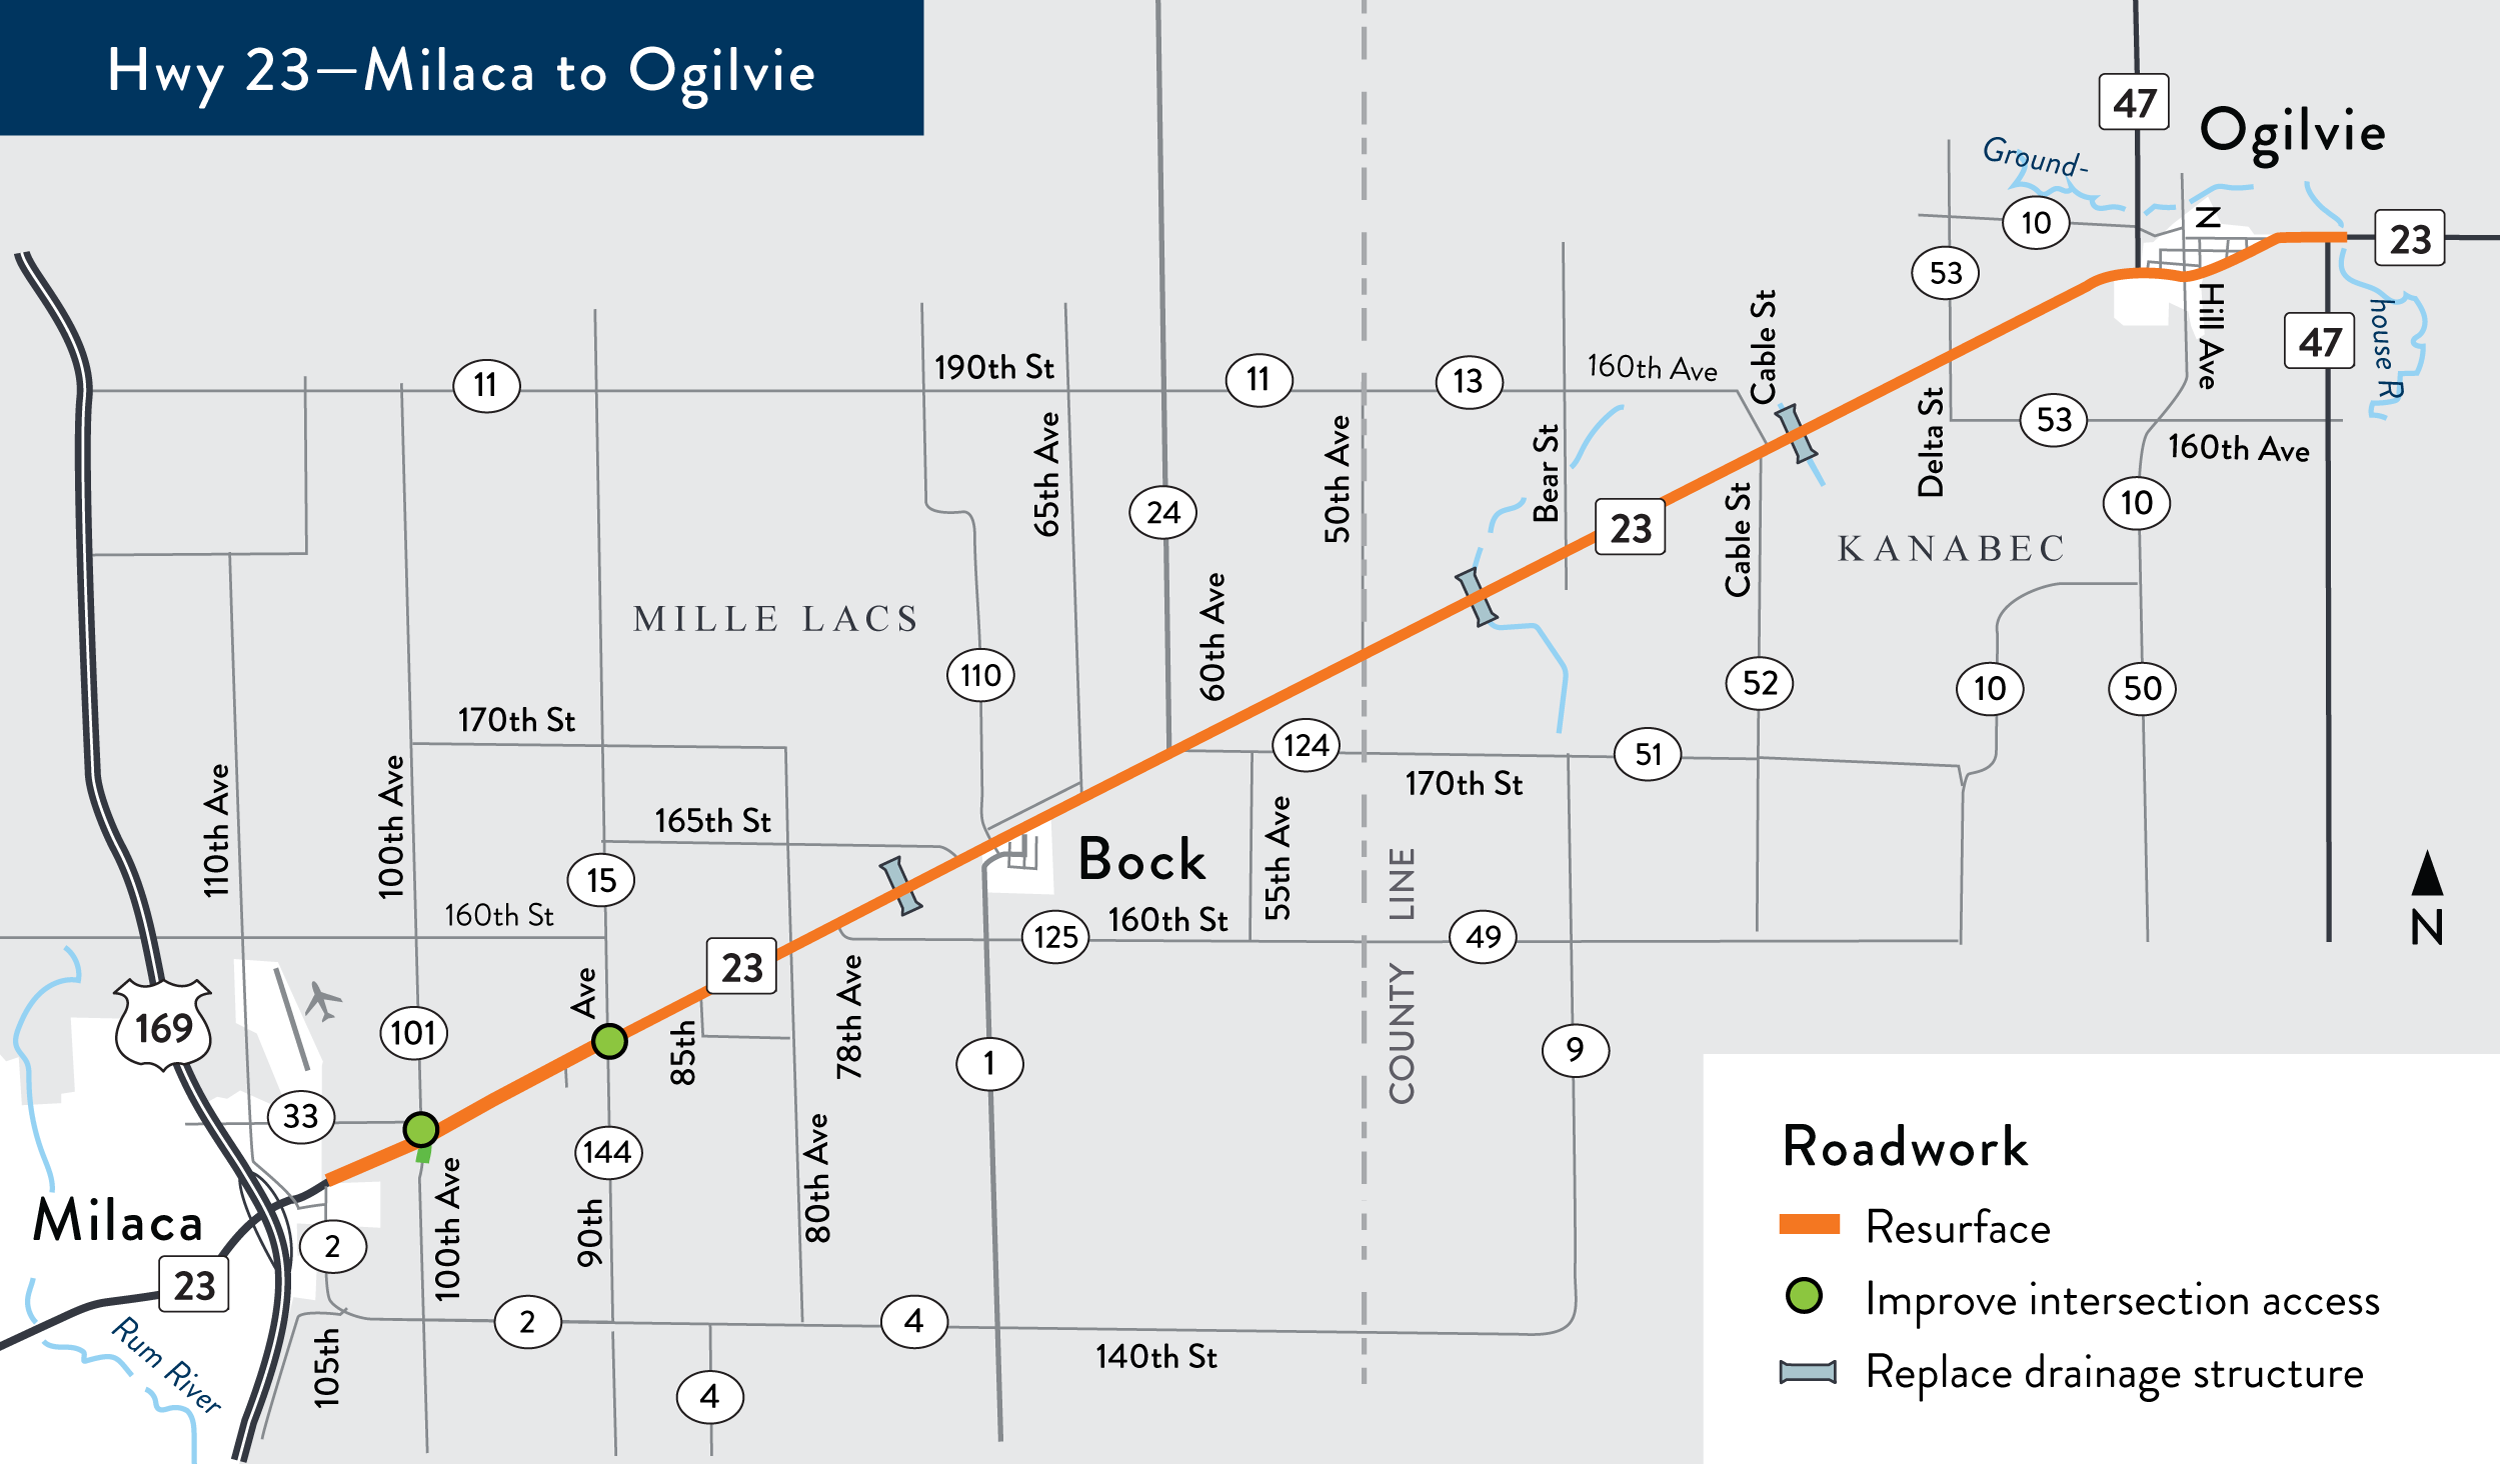 Hwy 23 Milaca to Ogilvie project map